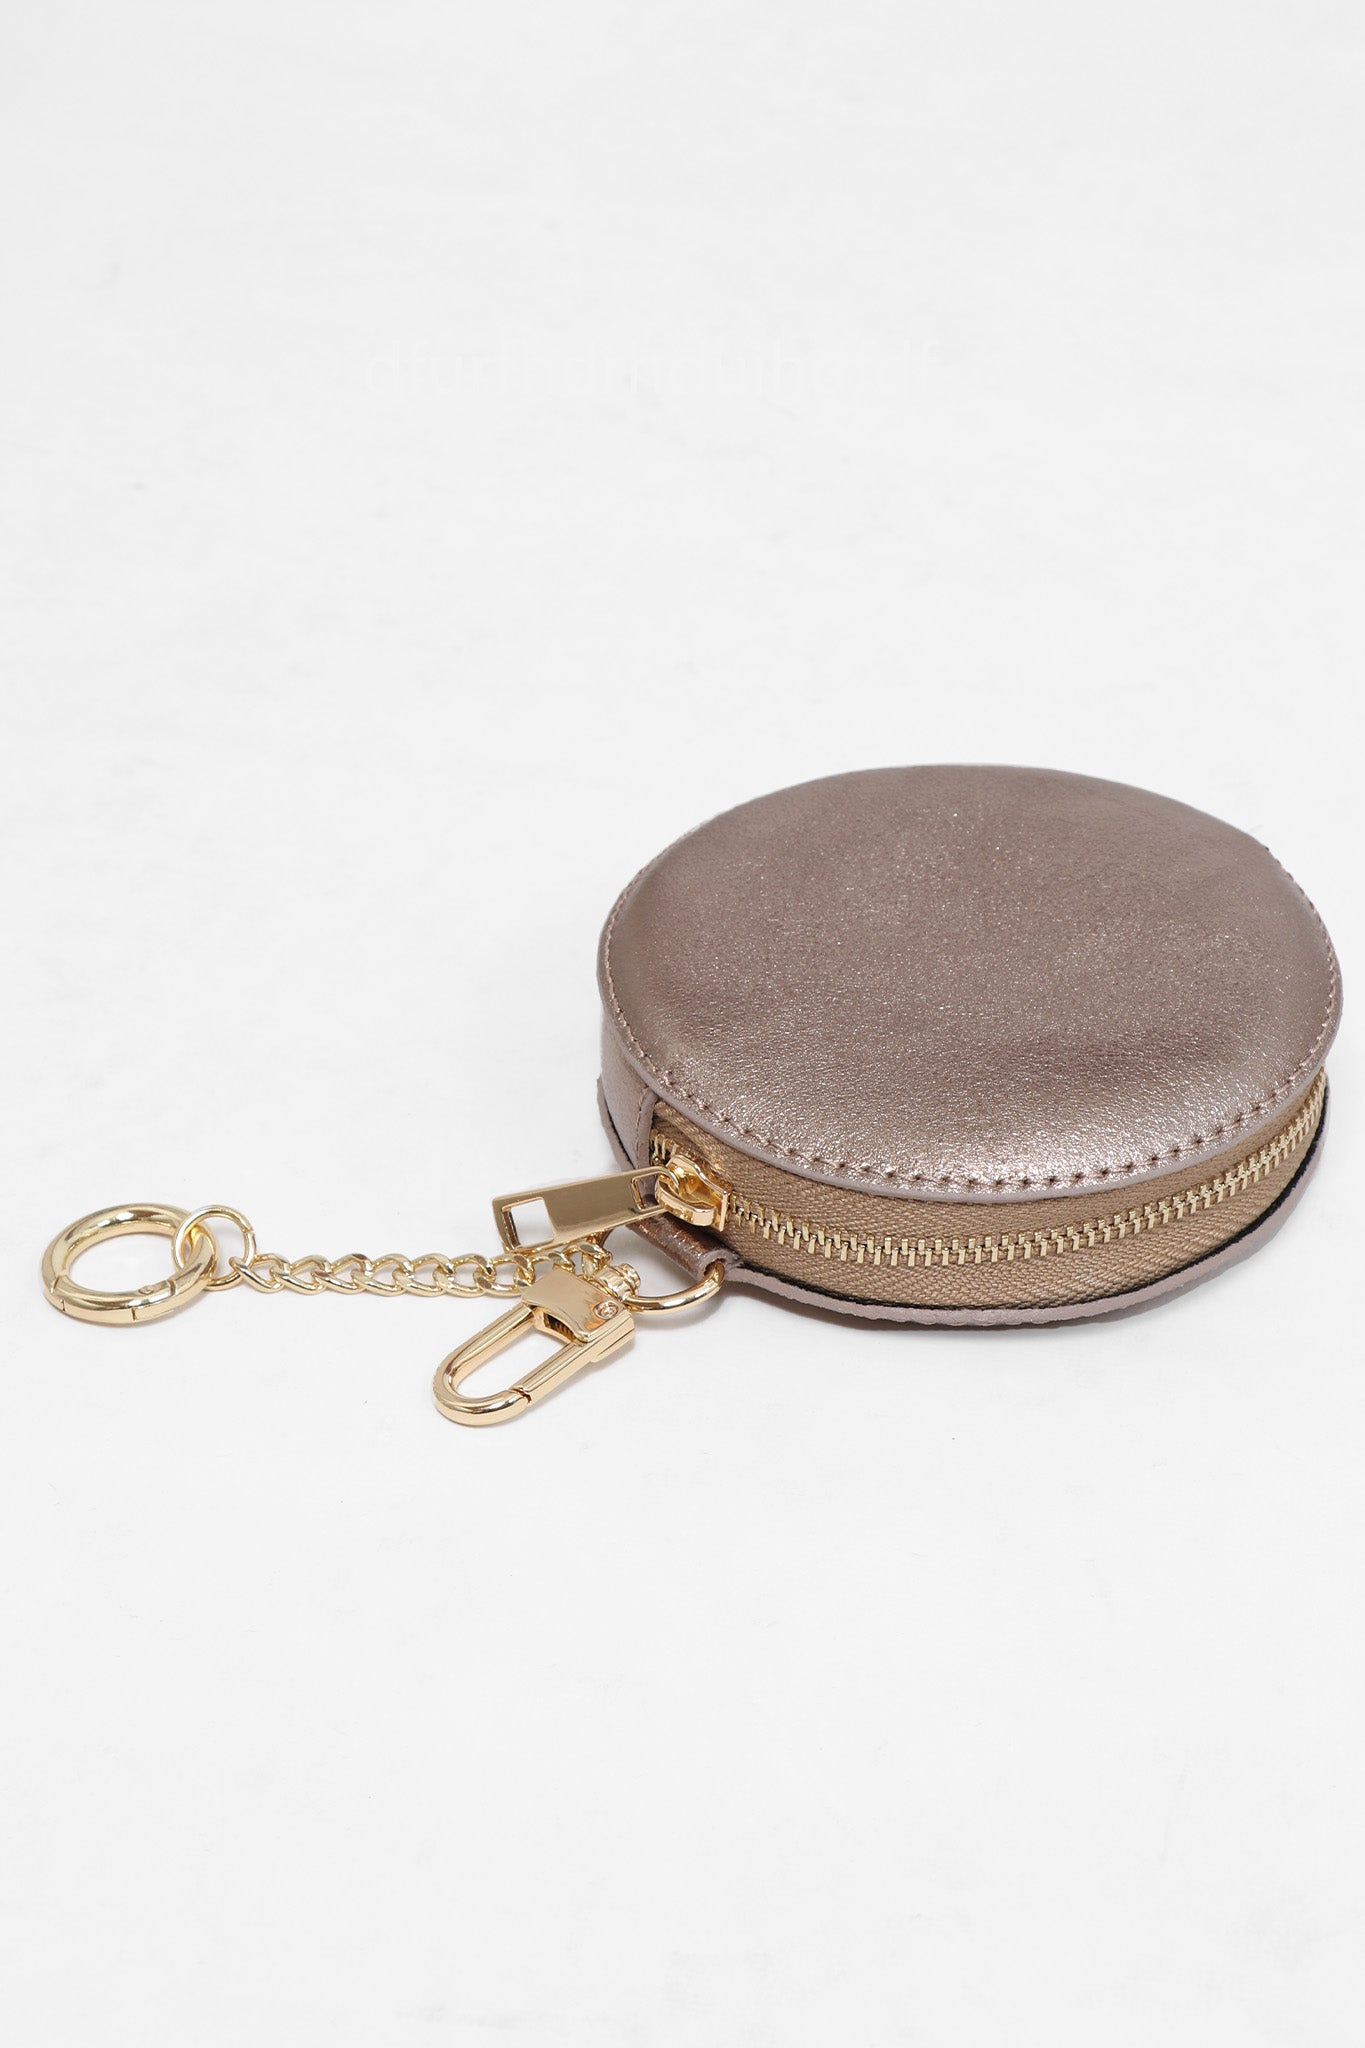 Champagne Leather Coin Purse Medium - Illustrated Living